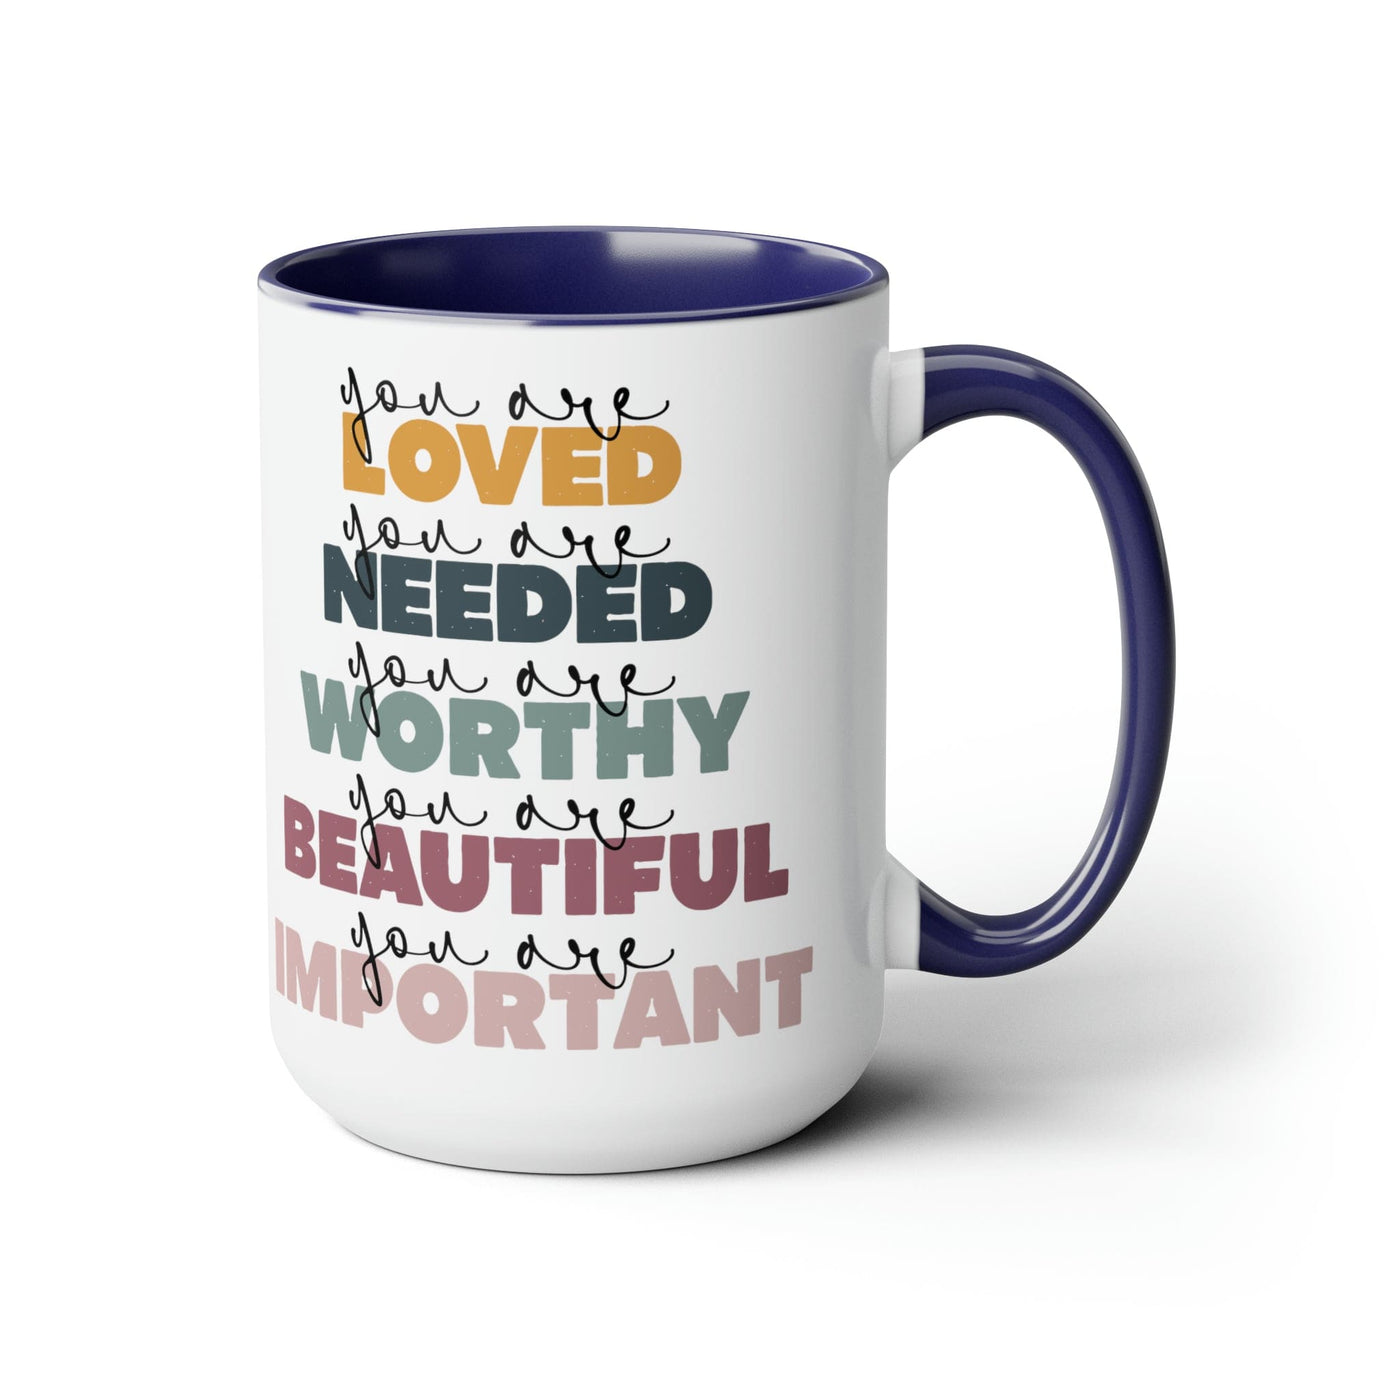 Accent Ceramic Coffee Mug 15oz - You Are Loved Inspiration Affirmation